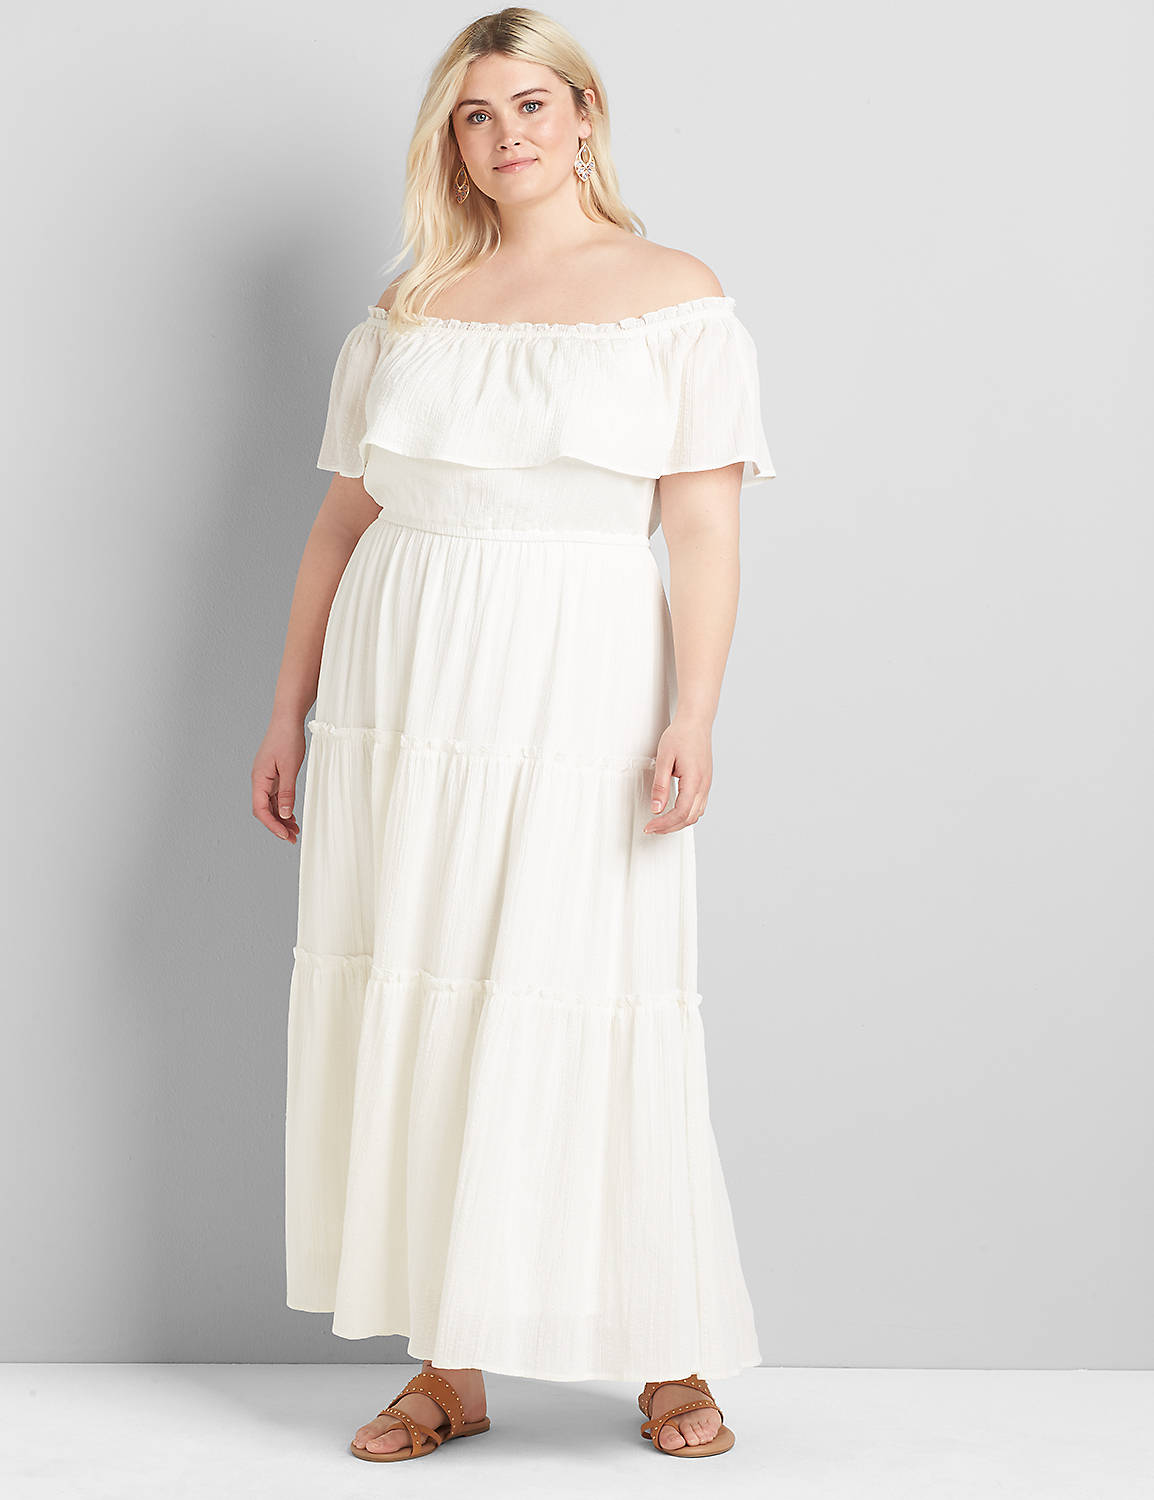 Short Sleeve Off The Shoulder Tiered Maxi 1120640:Ascena White:22/24 PETITE Product Image 1